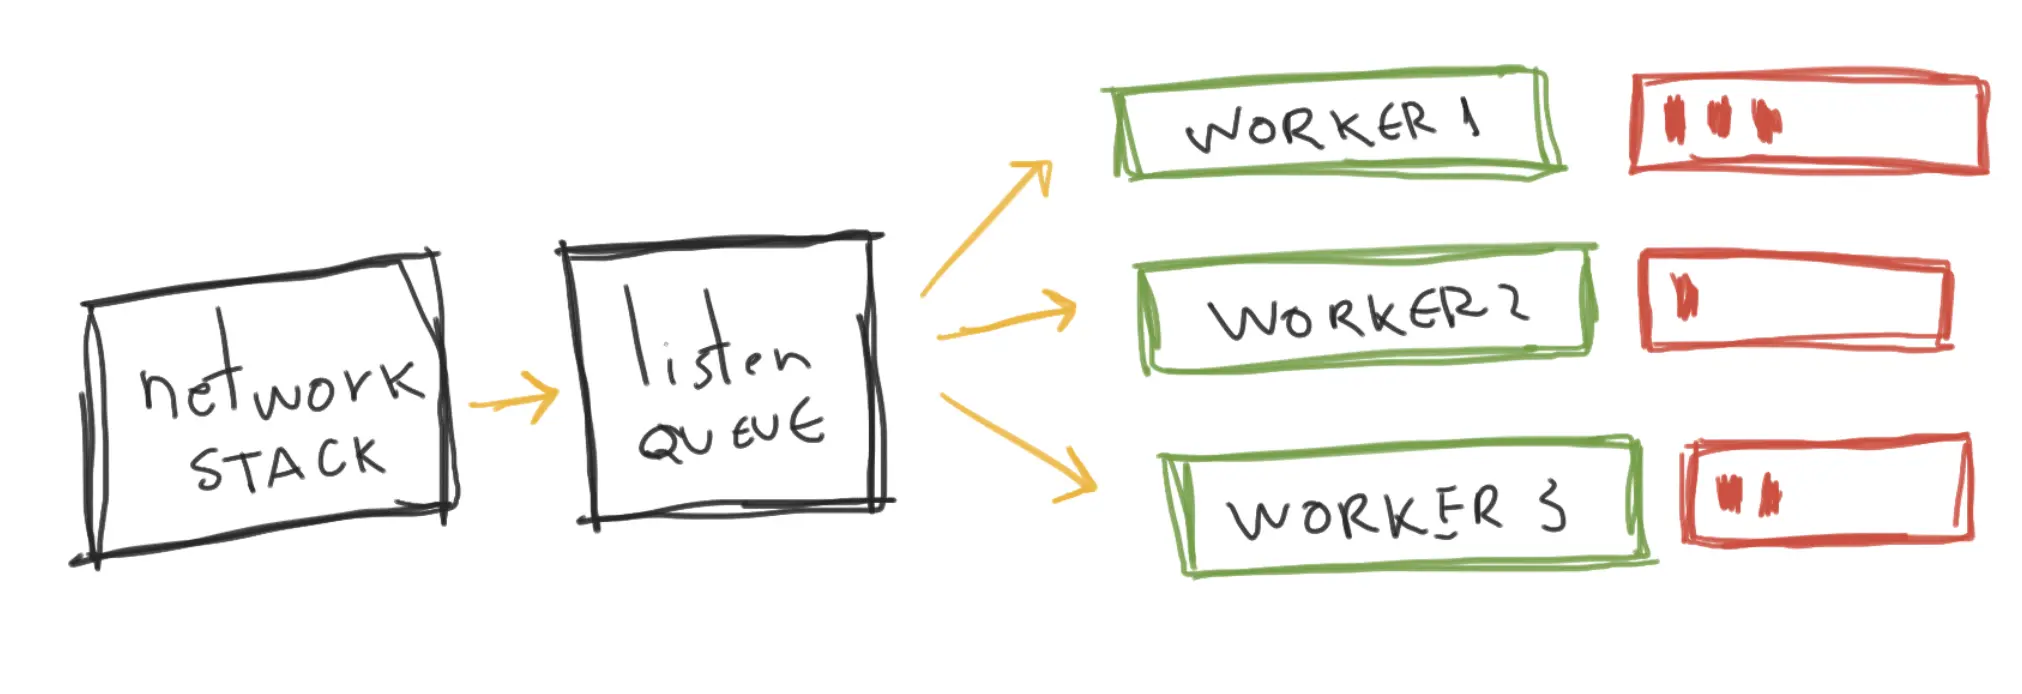 simplified workers nginx architecture